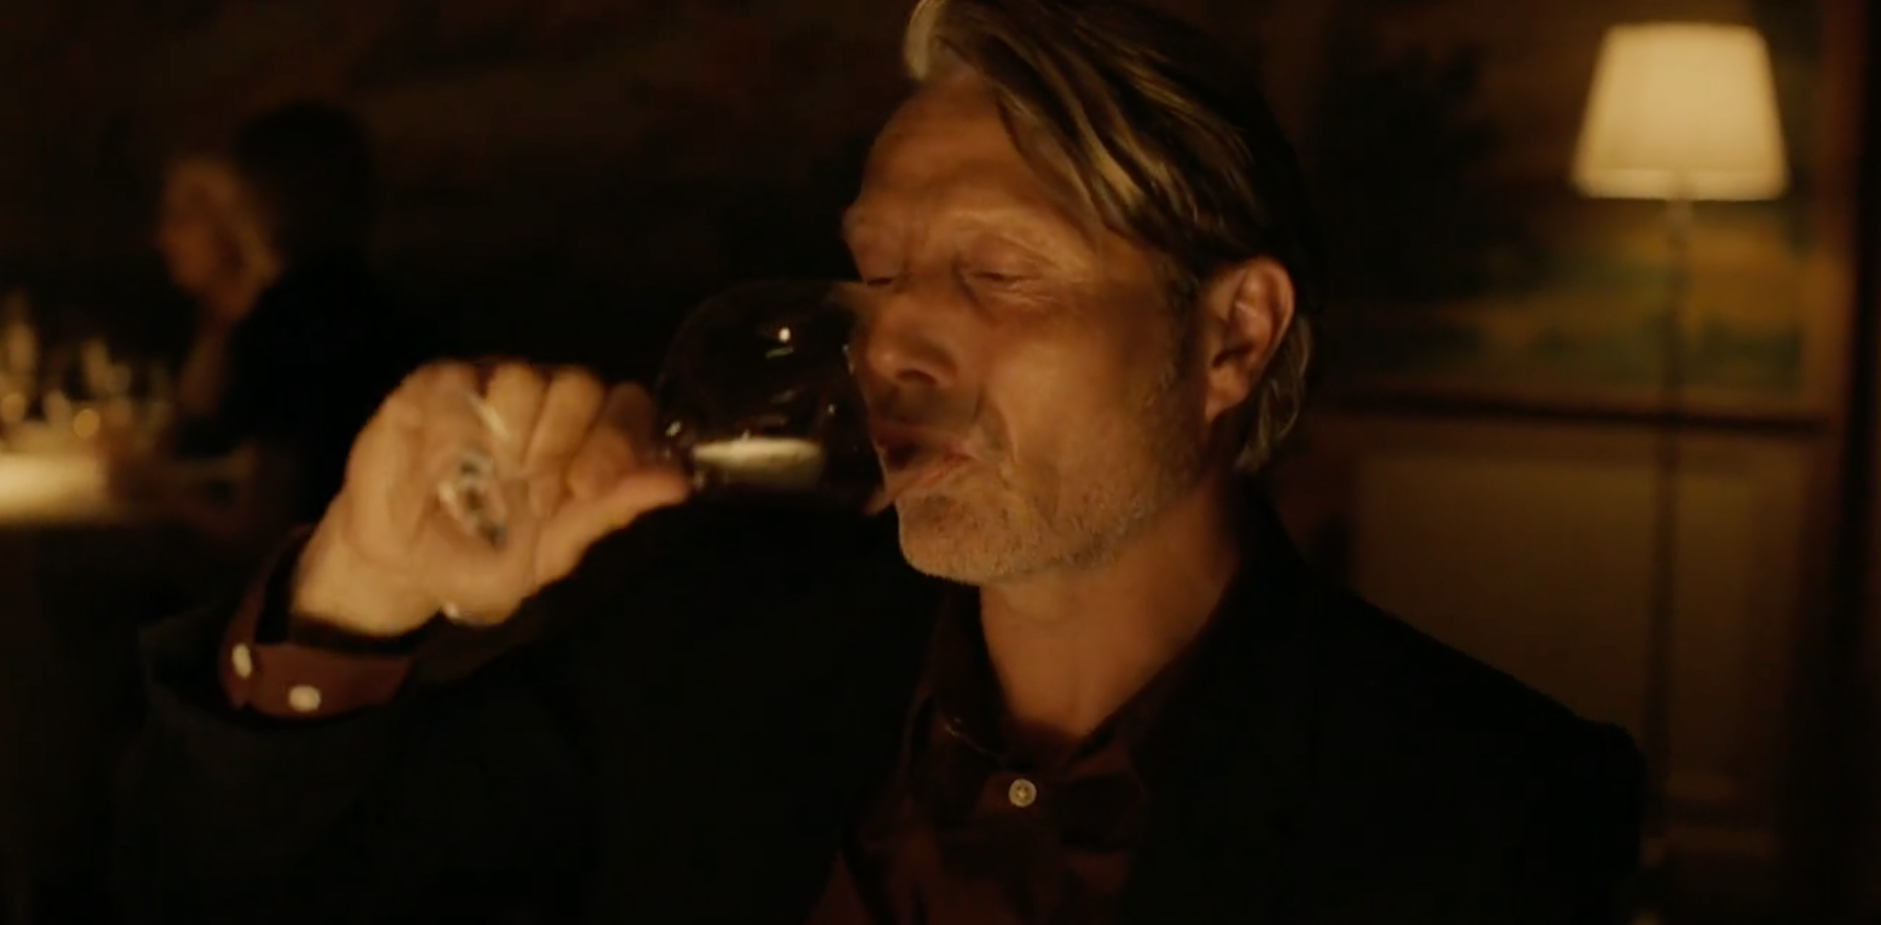 Thoughts on the first restaurant scene in ‎Thomas Vinterberg’s, Another Round